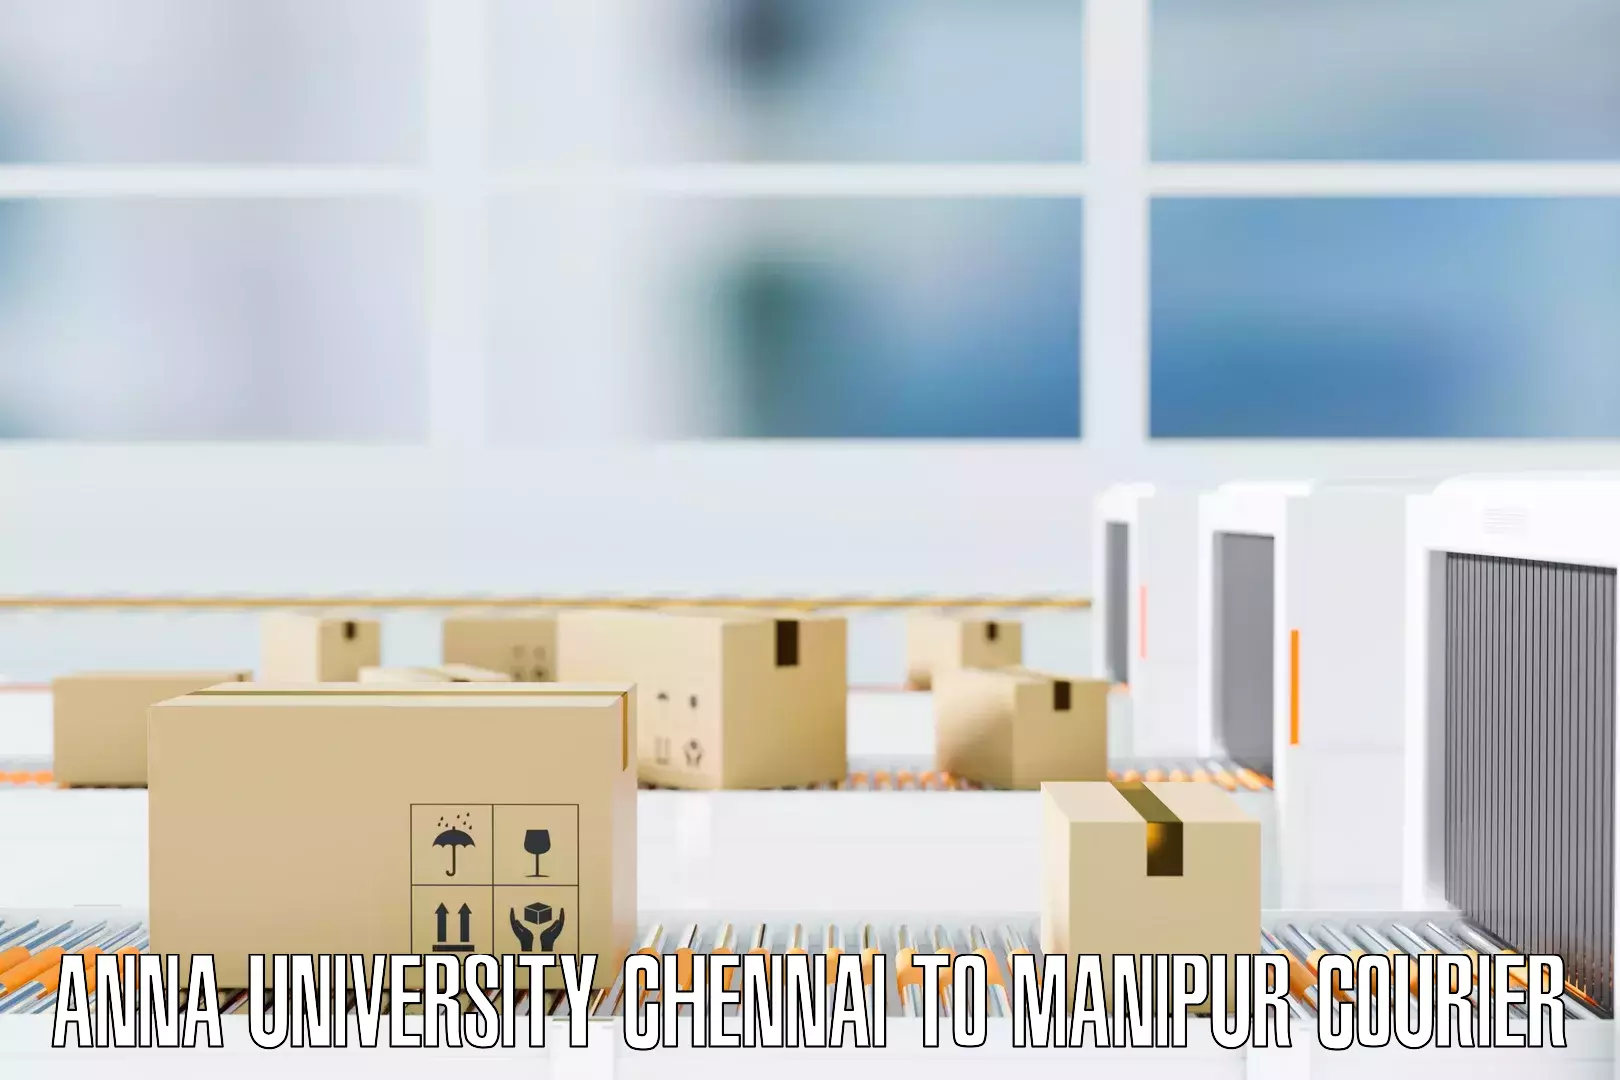 Furniture delivery service Anna University Chennai to Chandel